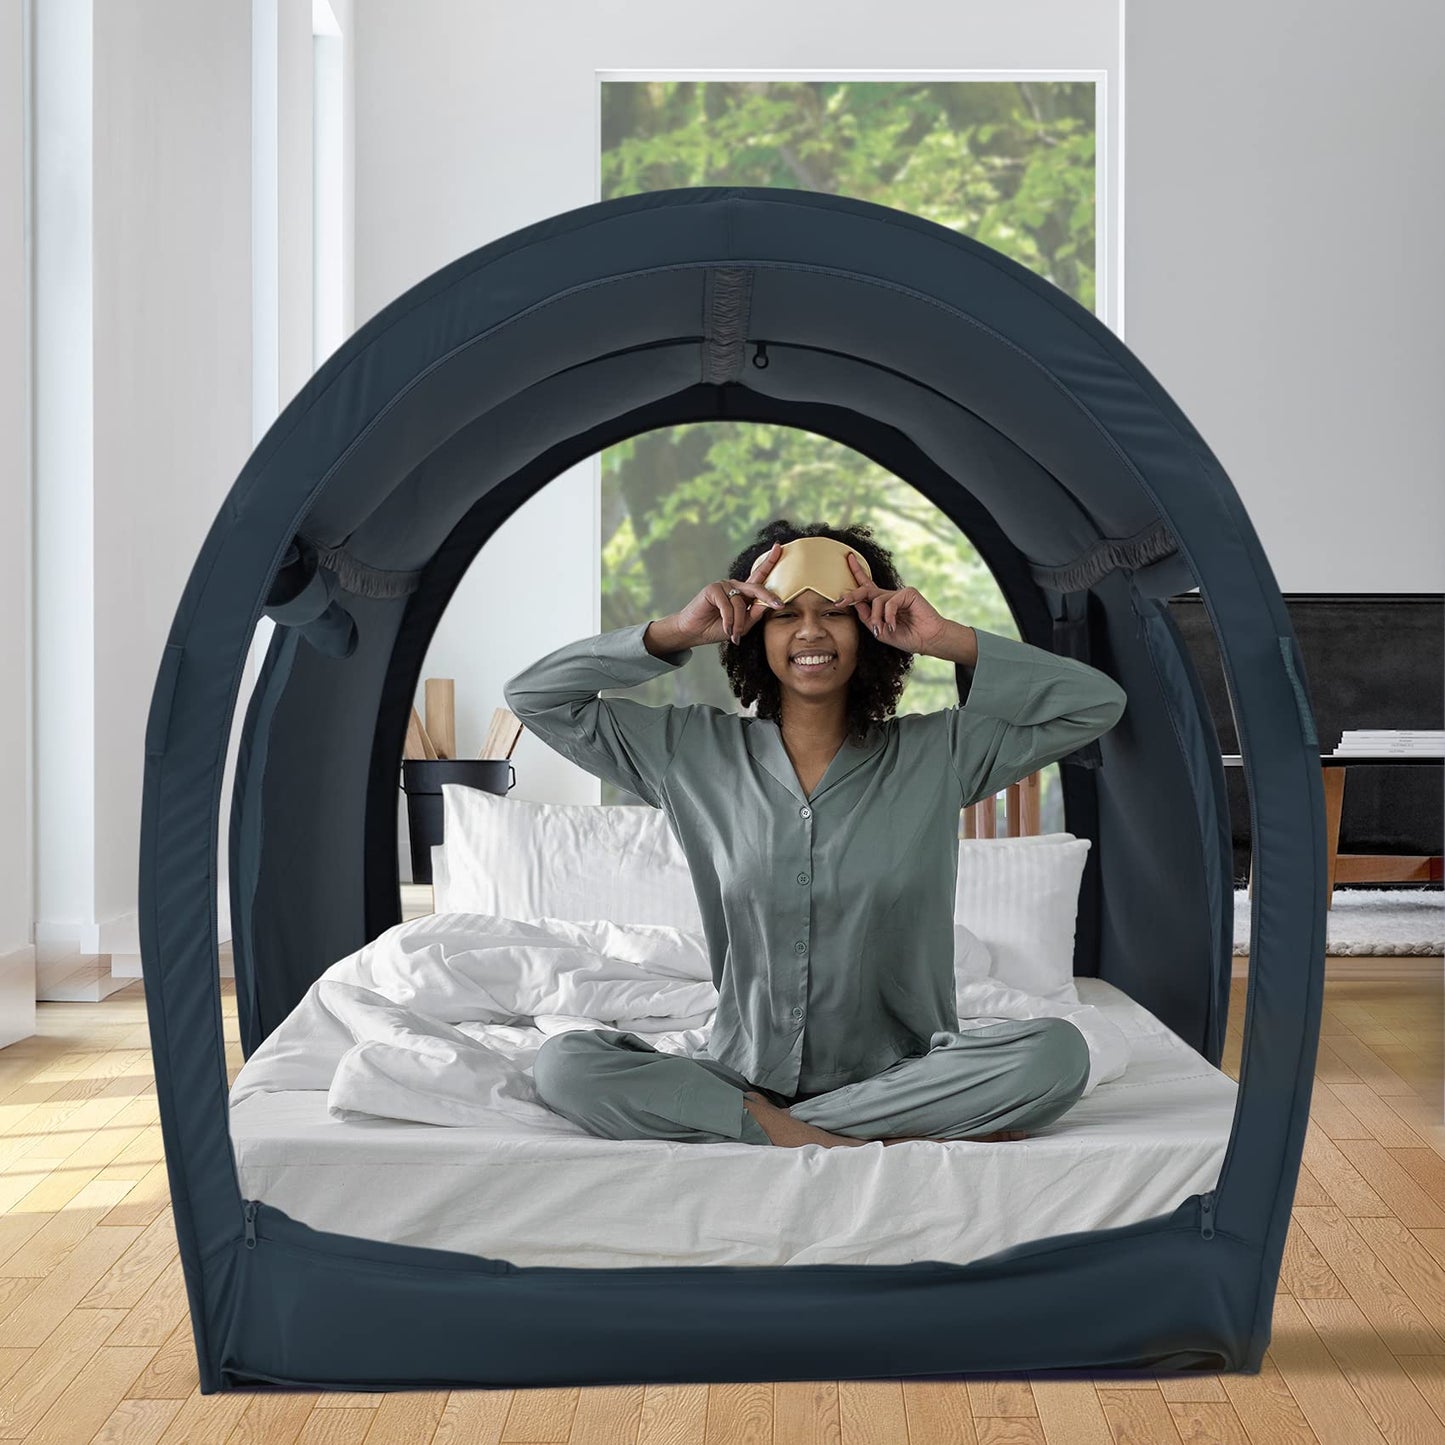 Bed Tent Dream Tents Bed Canopy Shelter Cabin Indoor Privacy Warm Breathable Pop Up Bunk Twin Size for Kids and Adult Patent Pending PitchBlack(Mattress Not Included)